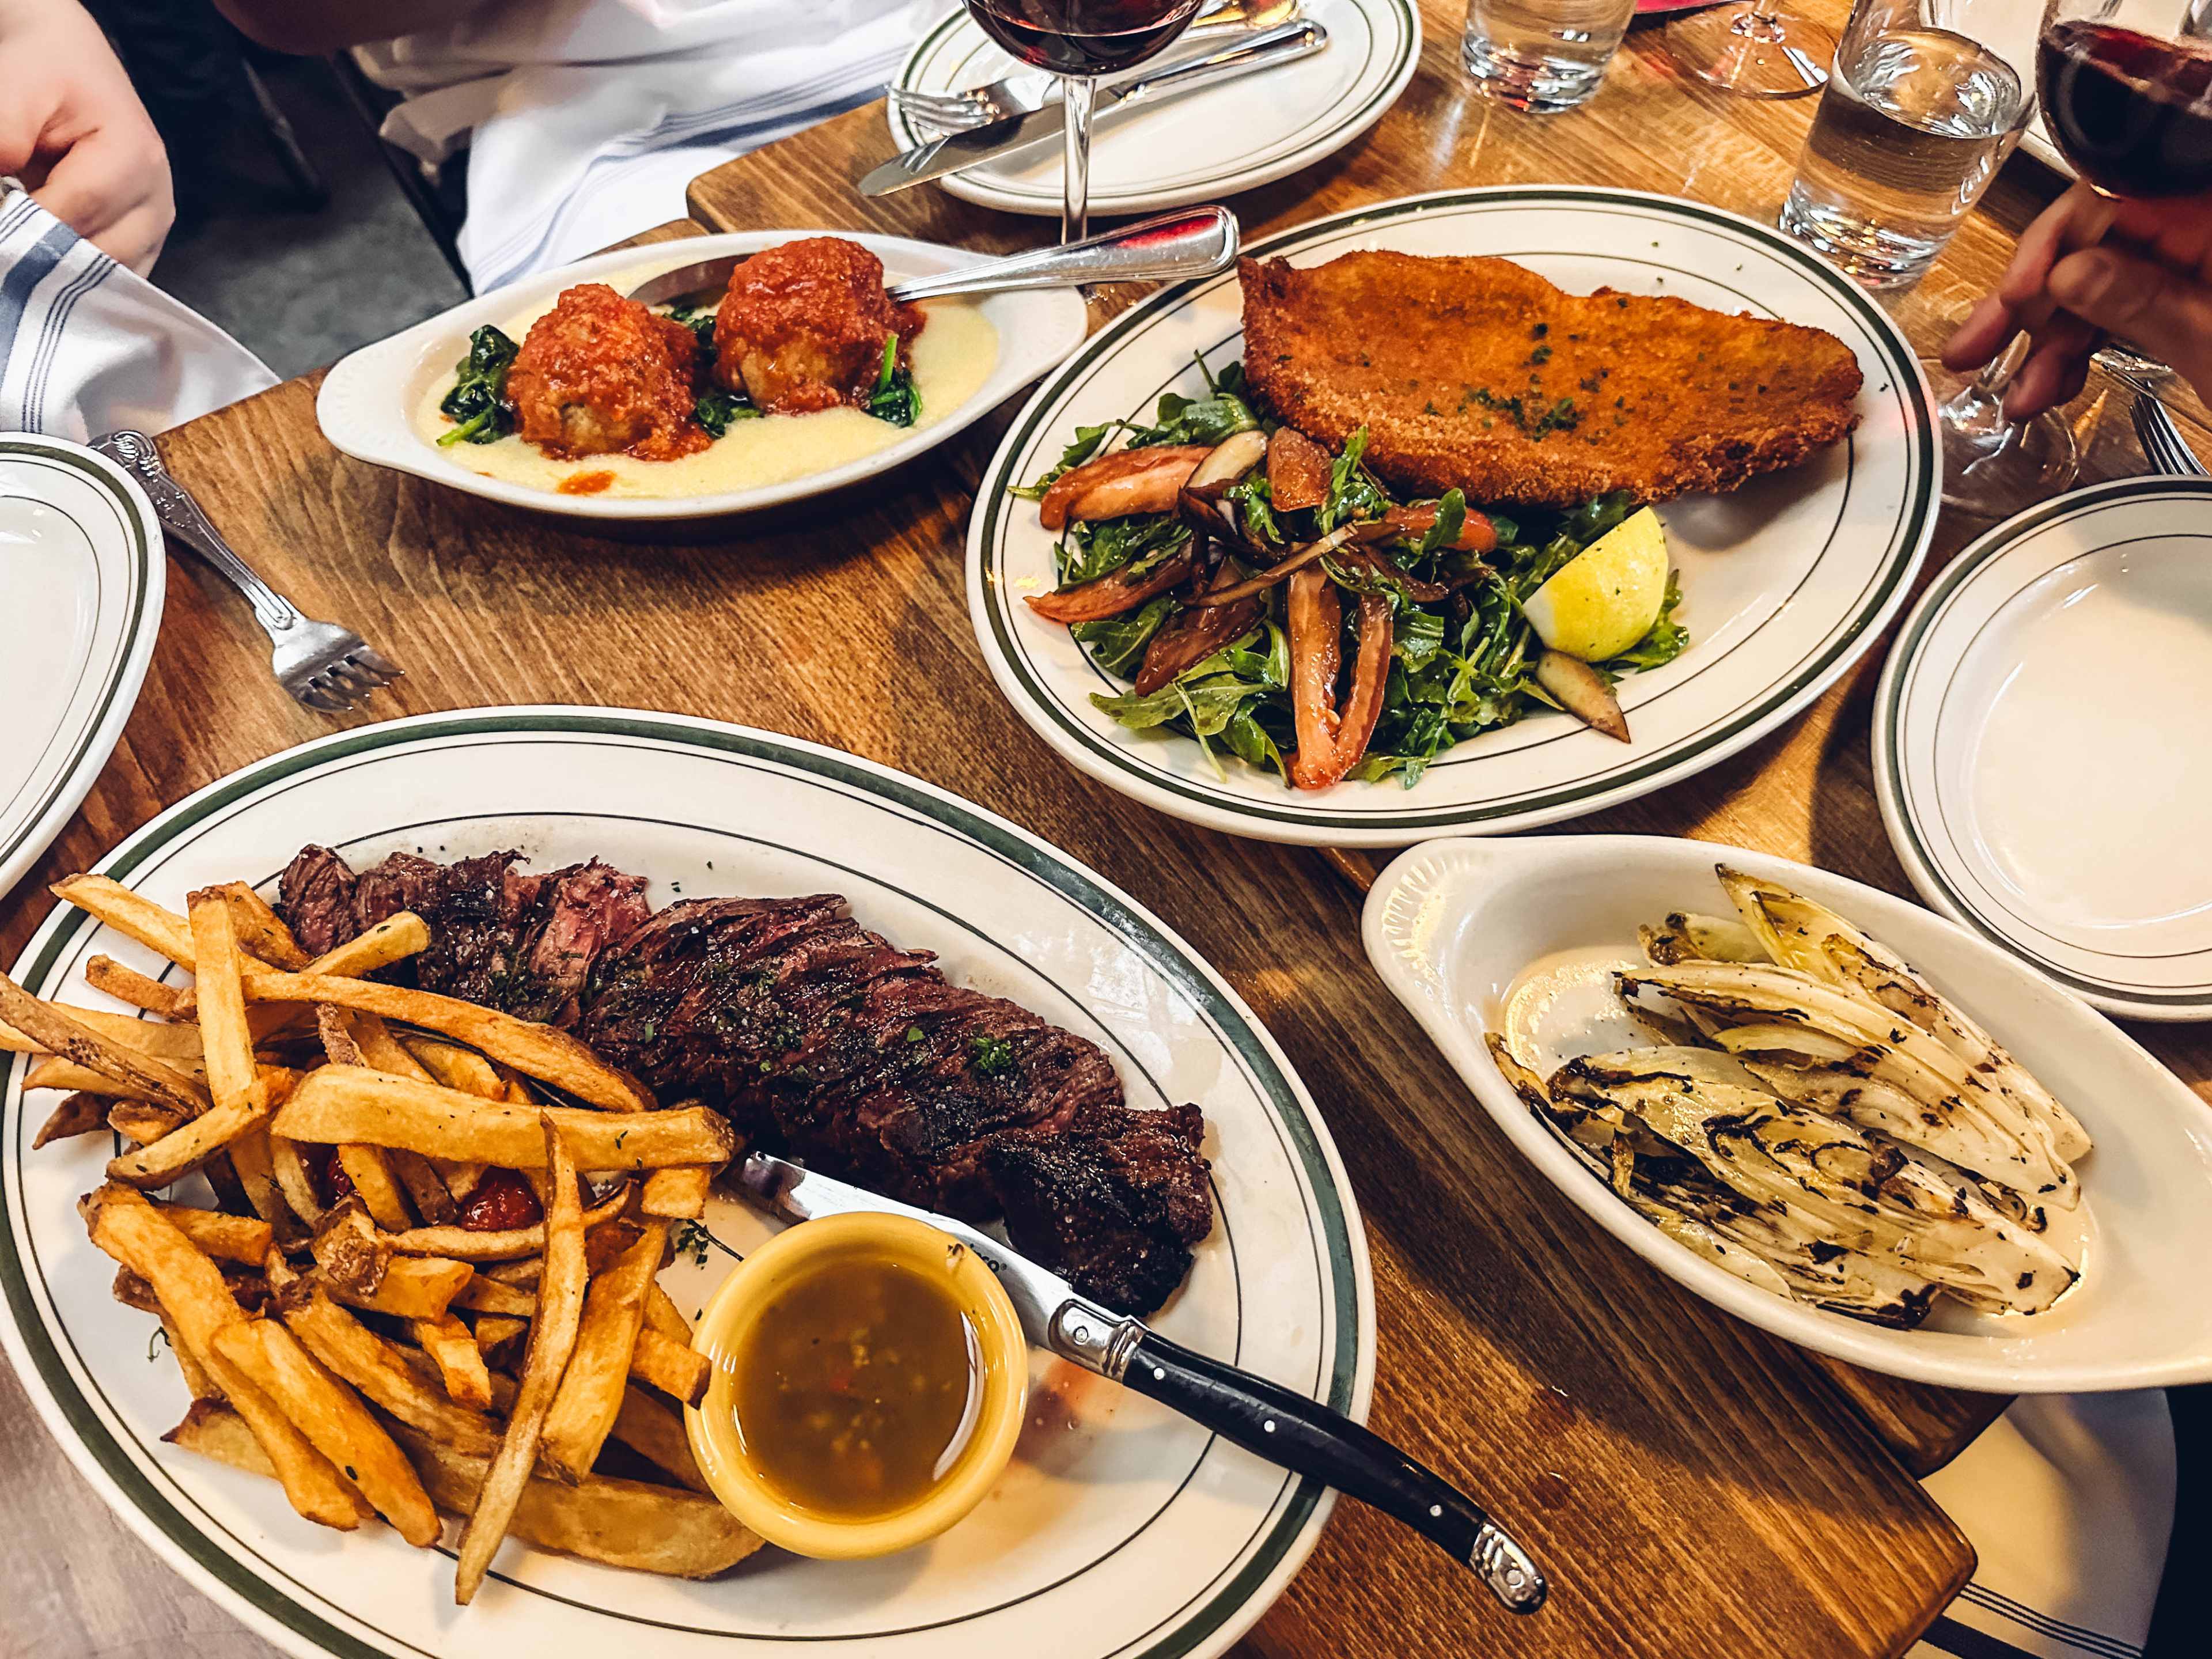 Bistecca and fries, grilled endive, meatballs and polenta, and chicken milanese at Go Nonna.